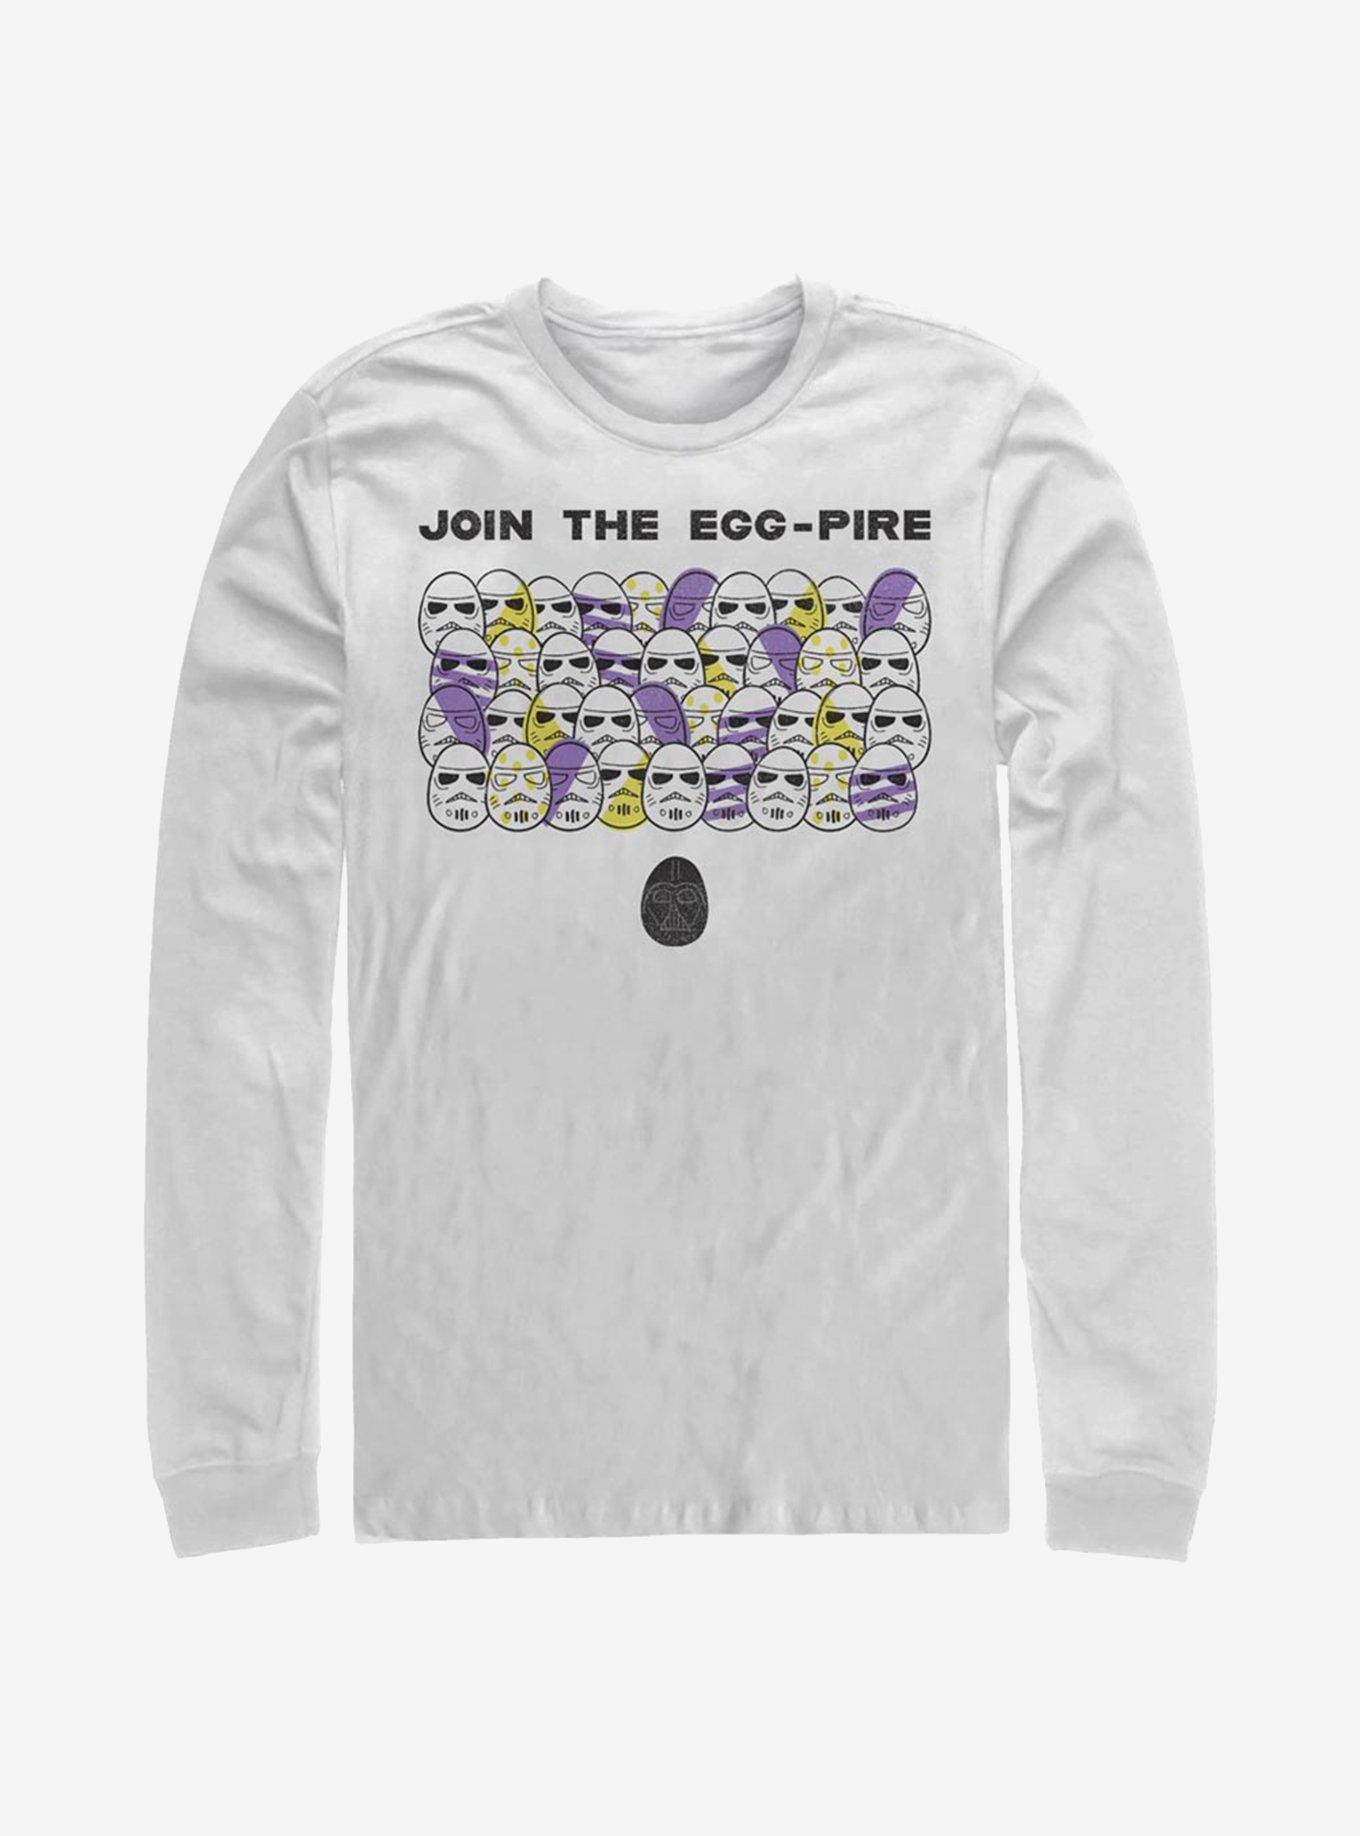 Star Wars Join The Egg-Pire Long-Sleeve T-Shirt, WHITE, hi-res